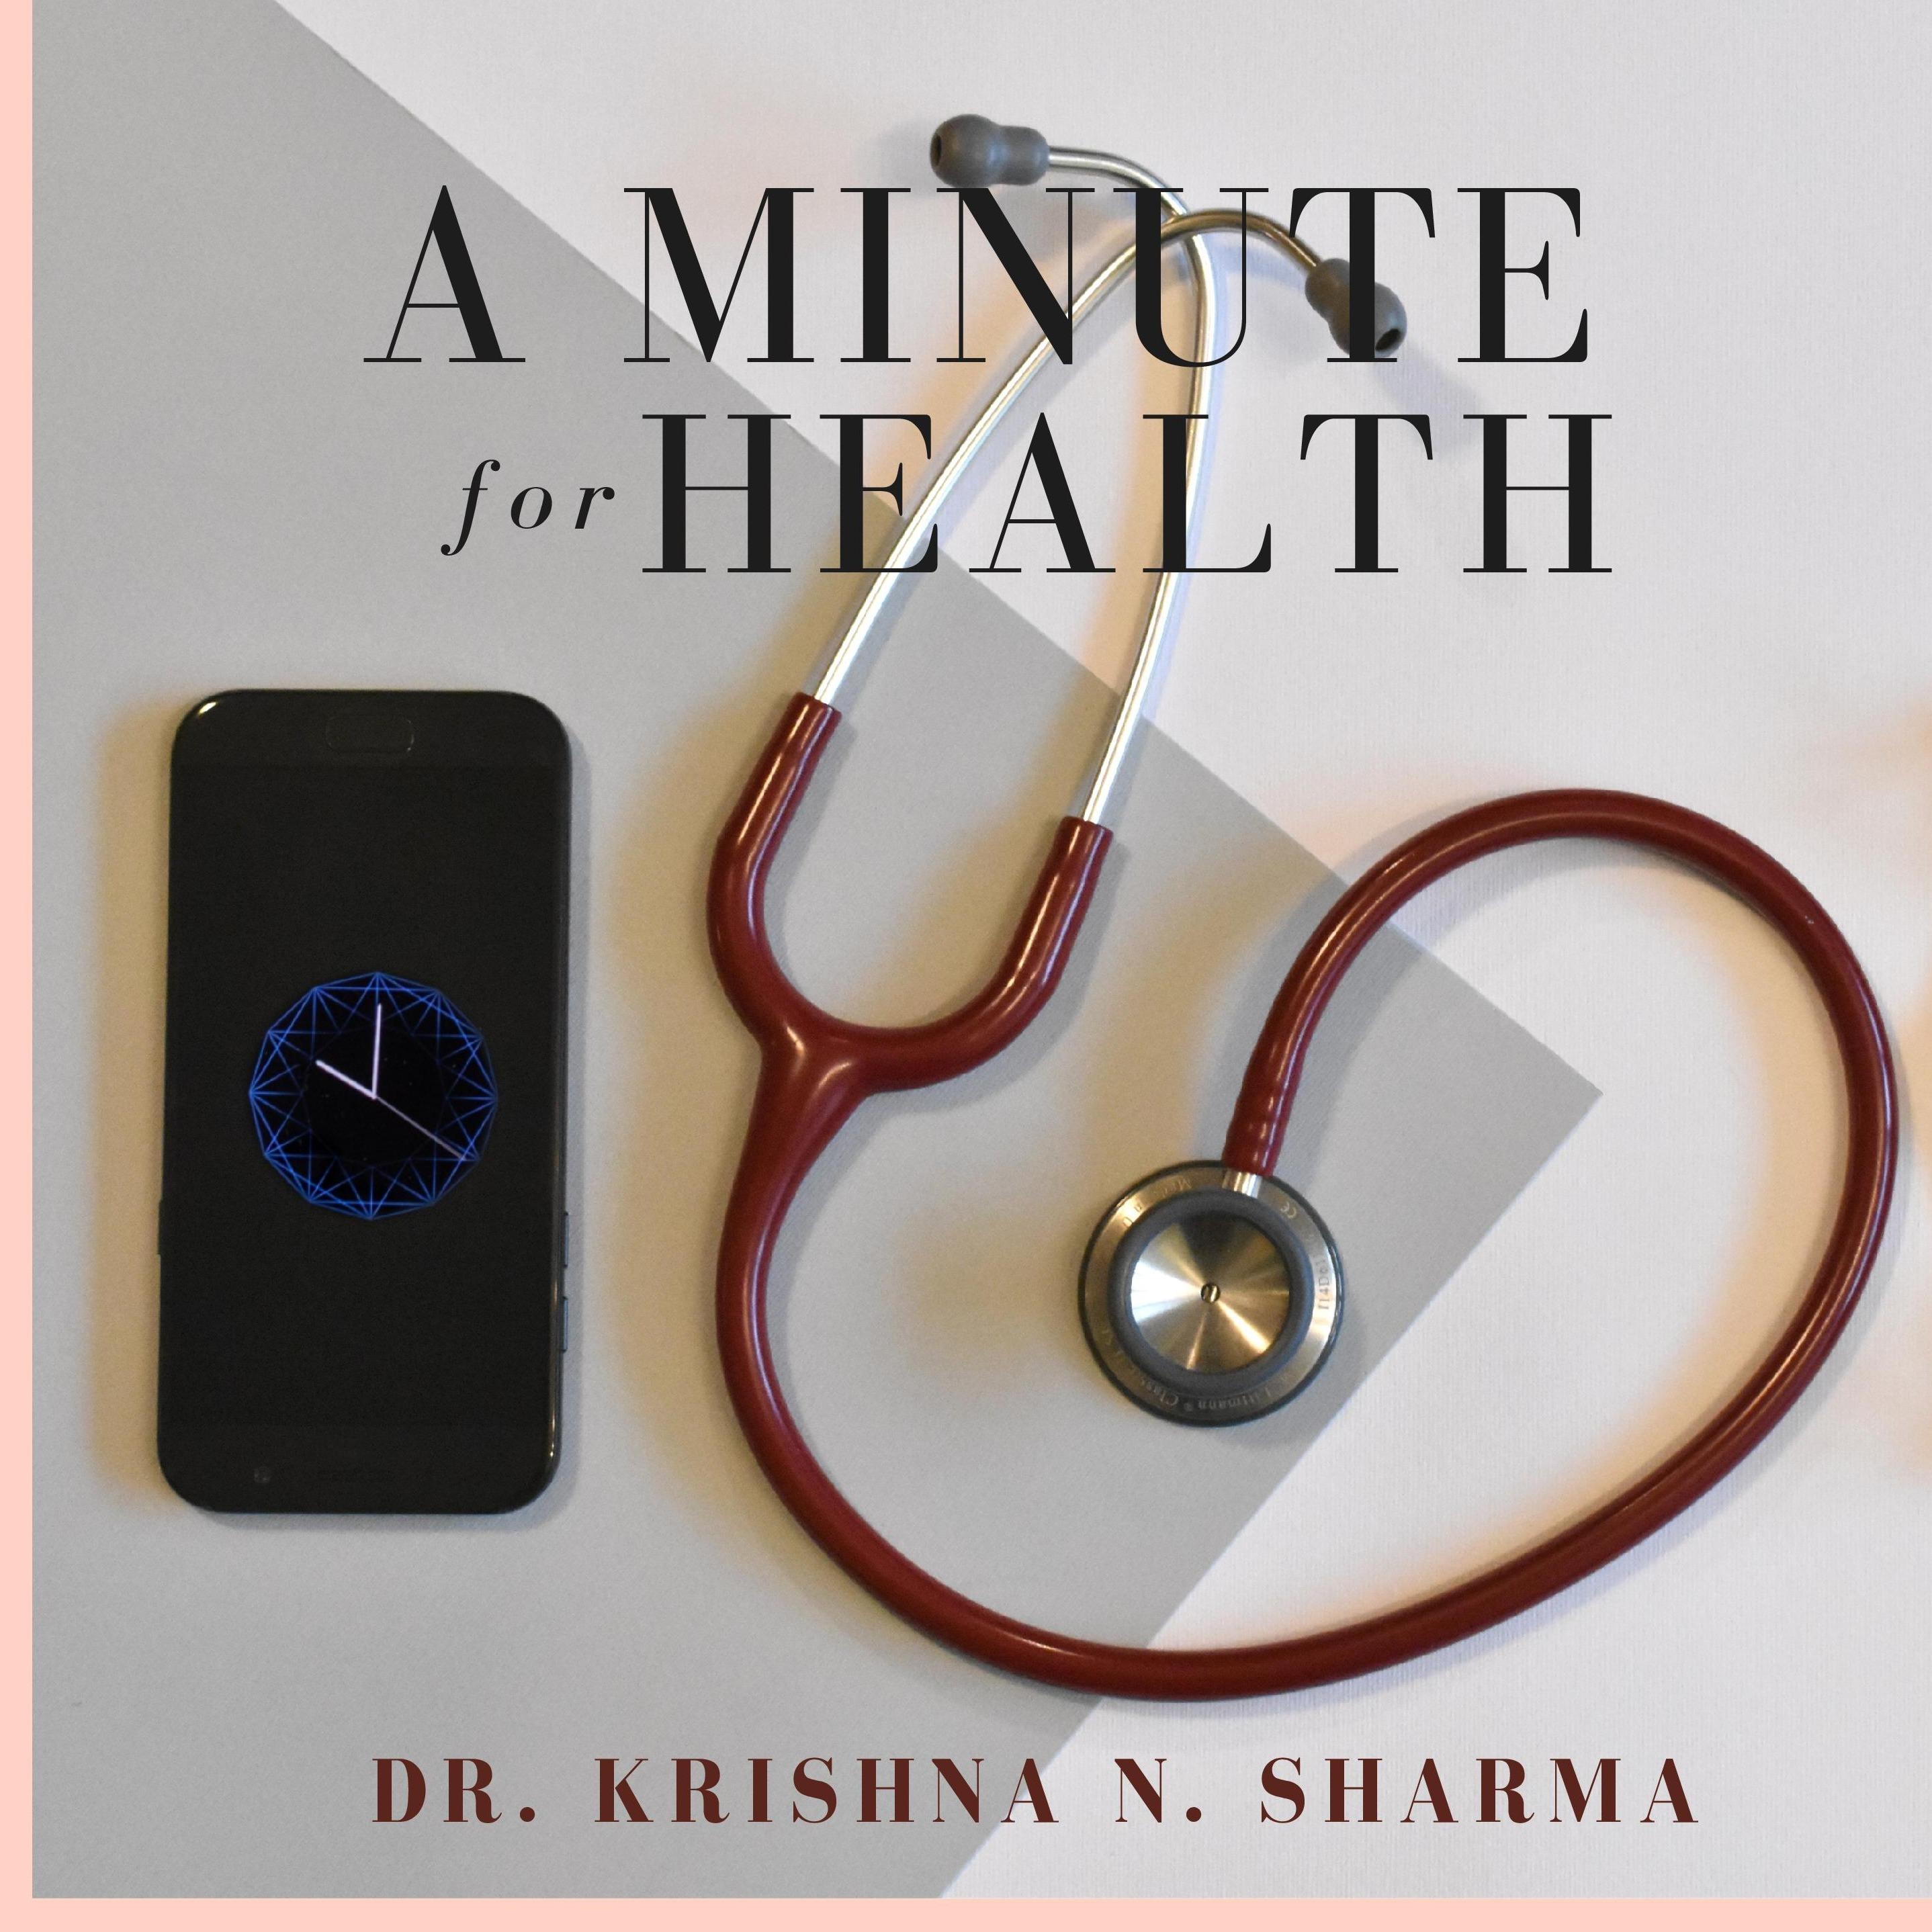 A Minute for Health